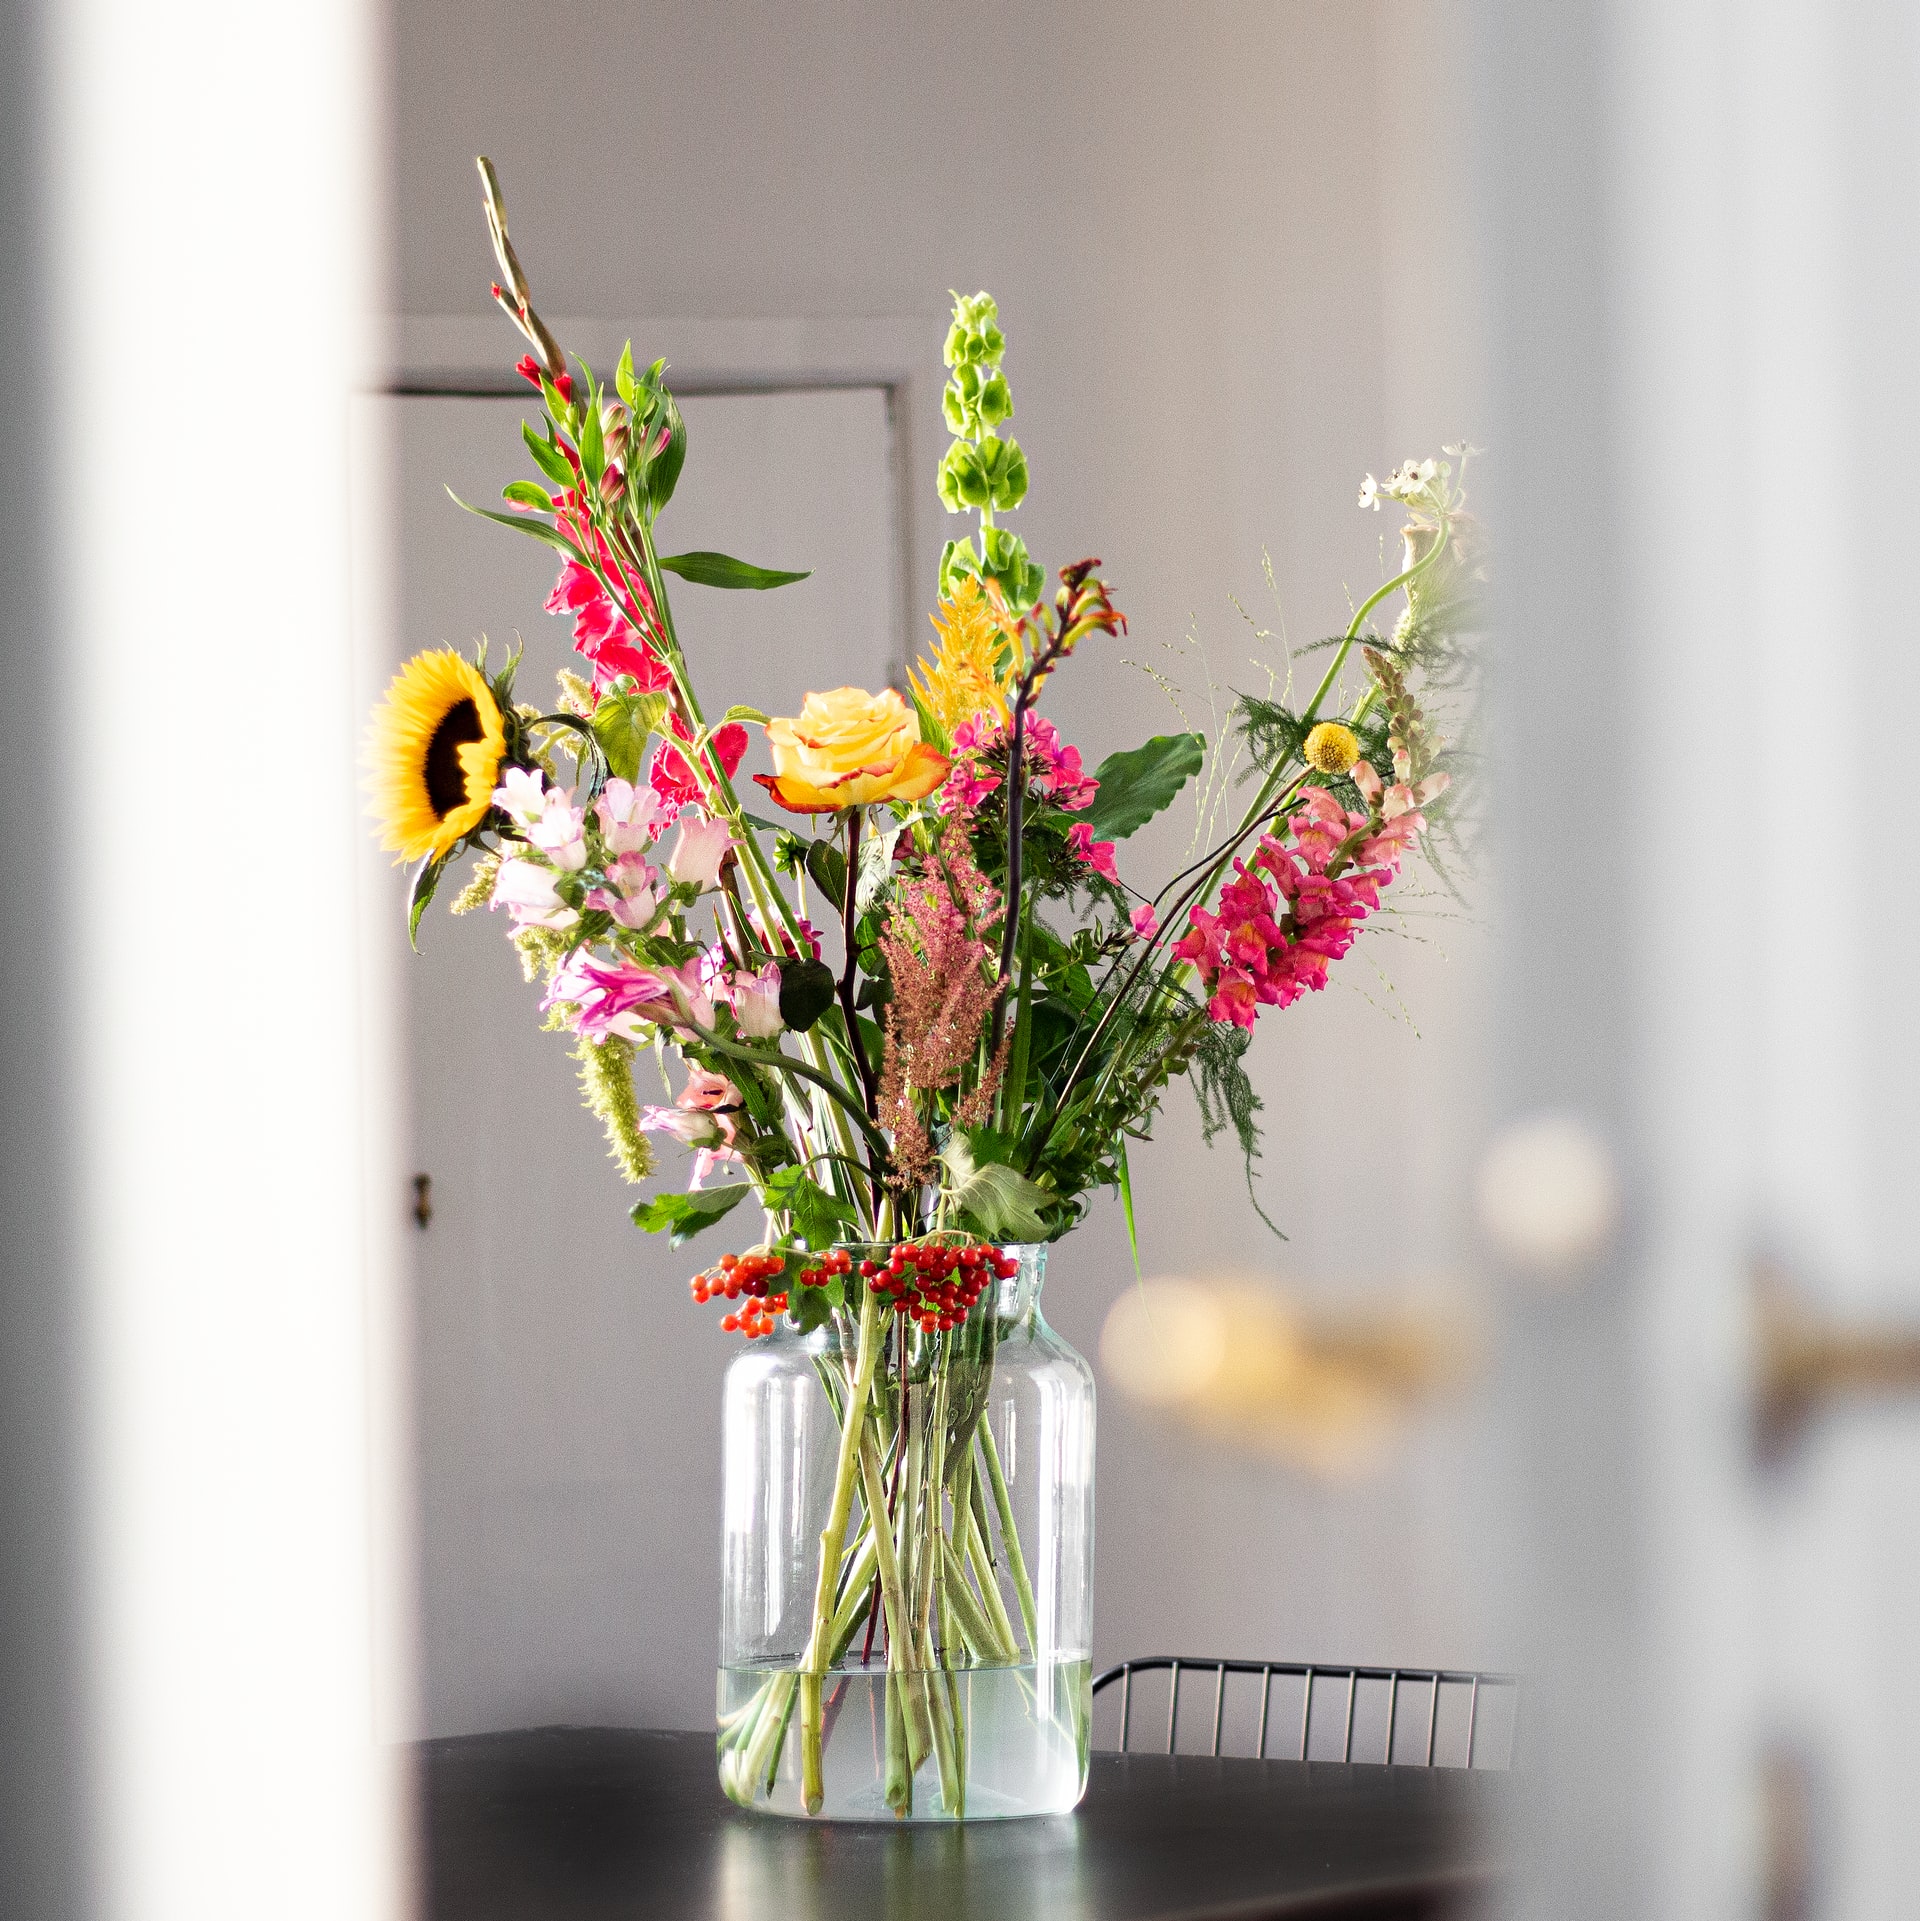 Not only live flowers – check how else to style a vase